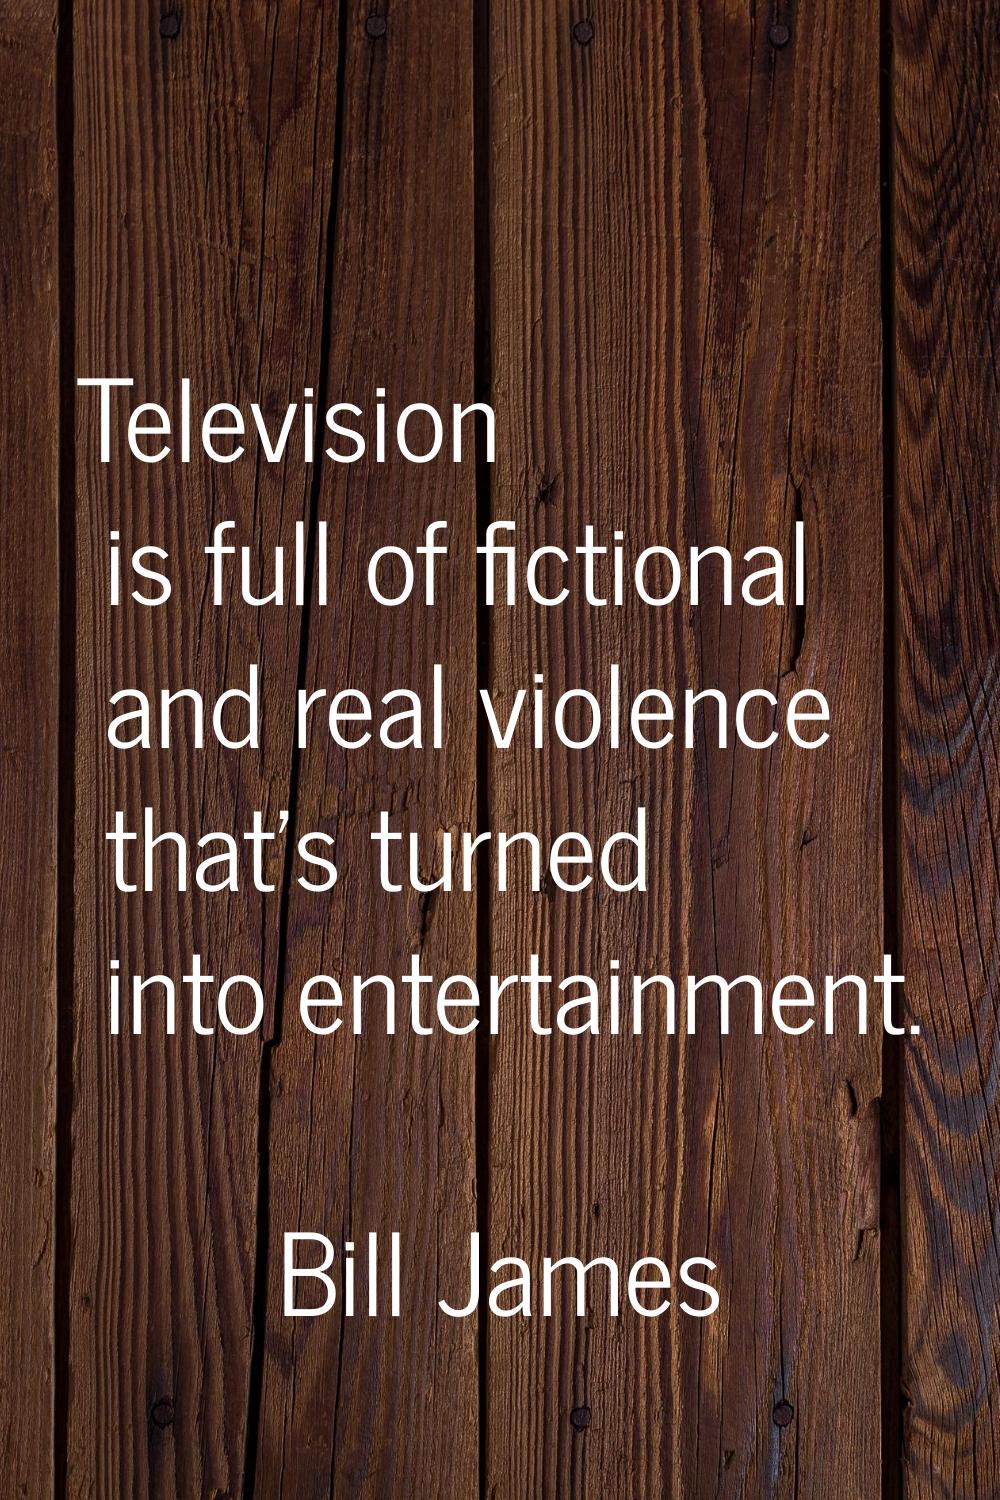 Television is full of fictional and real violence that's turned into entertainment.